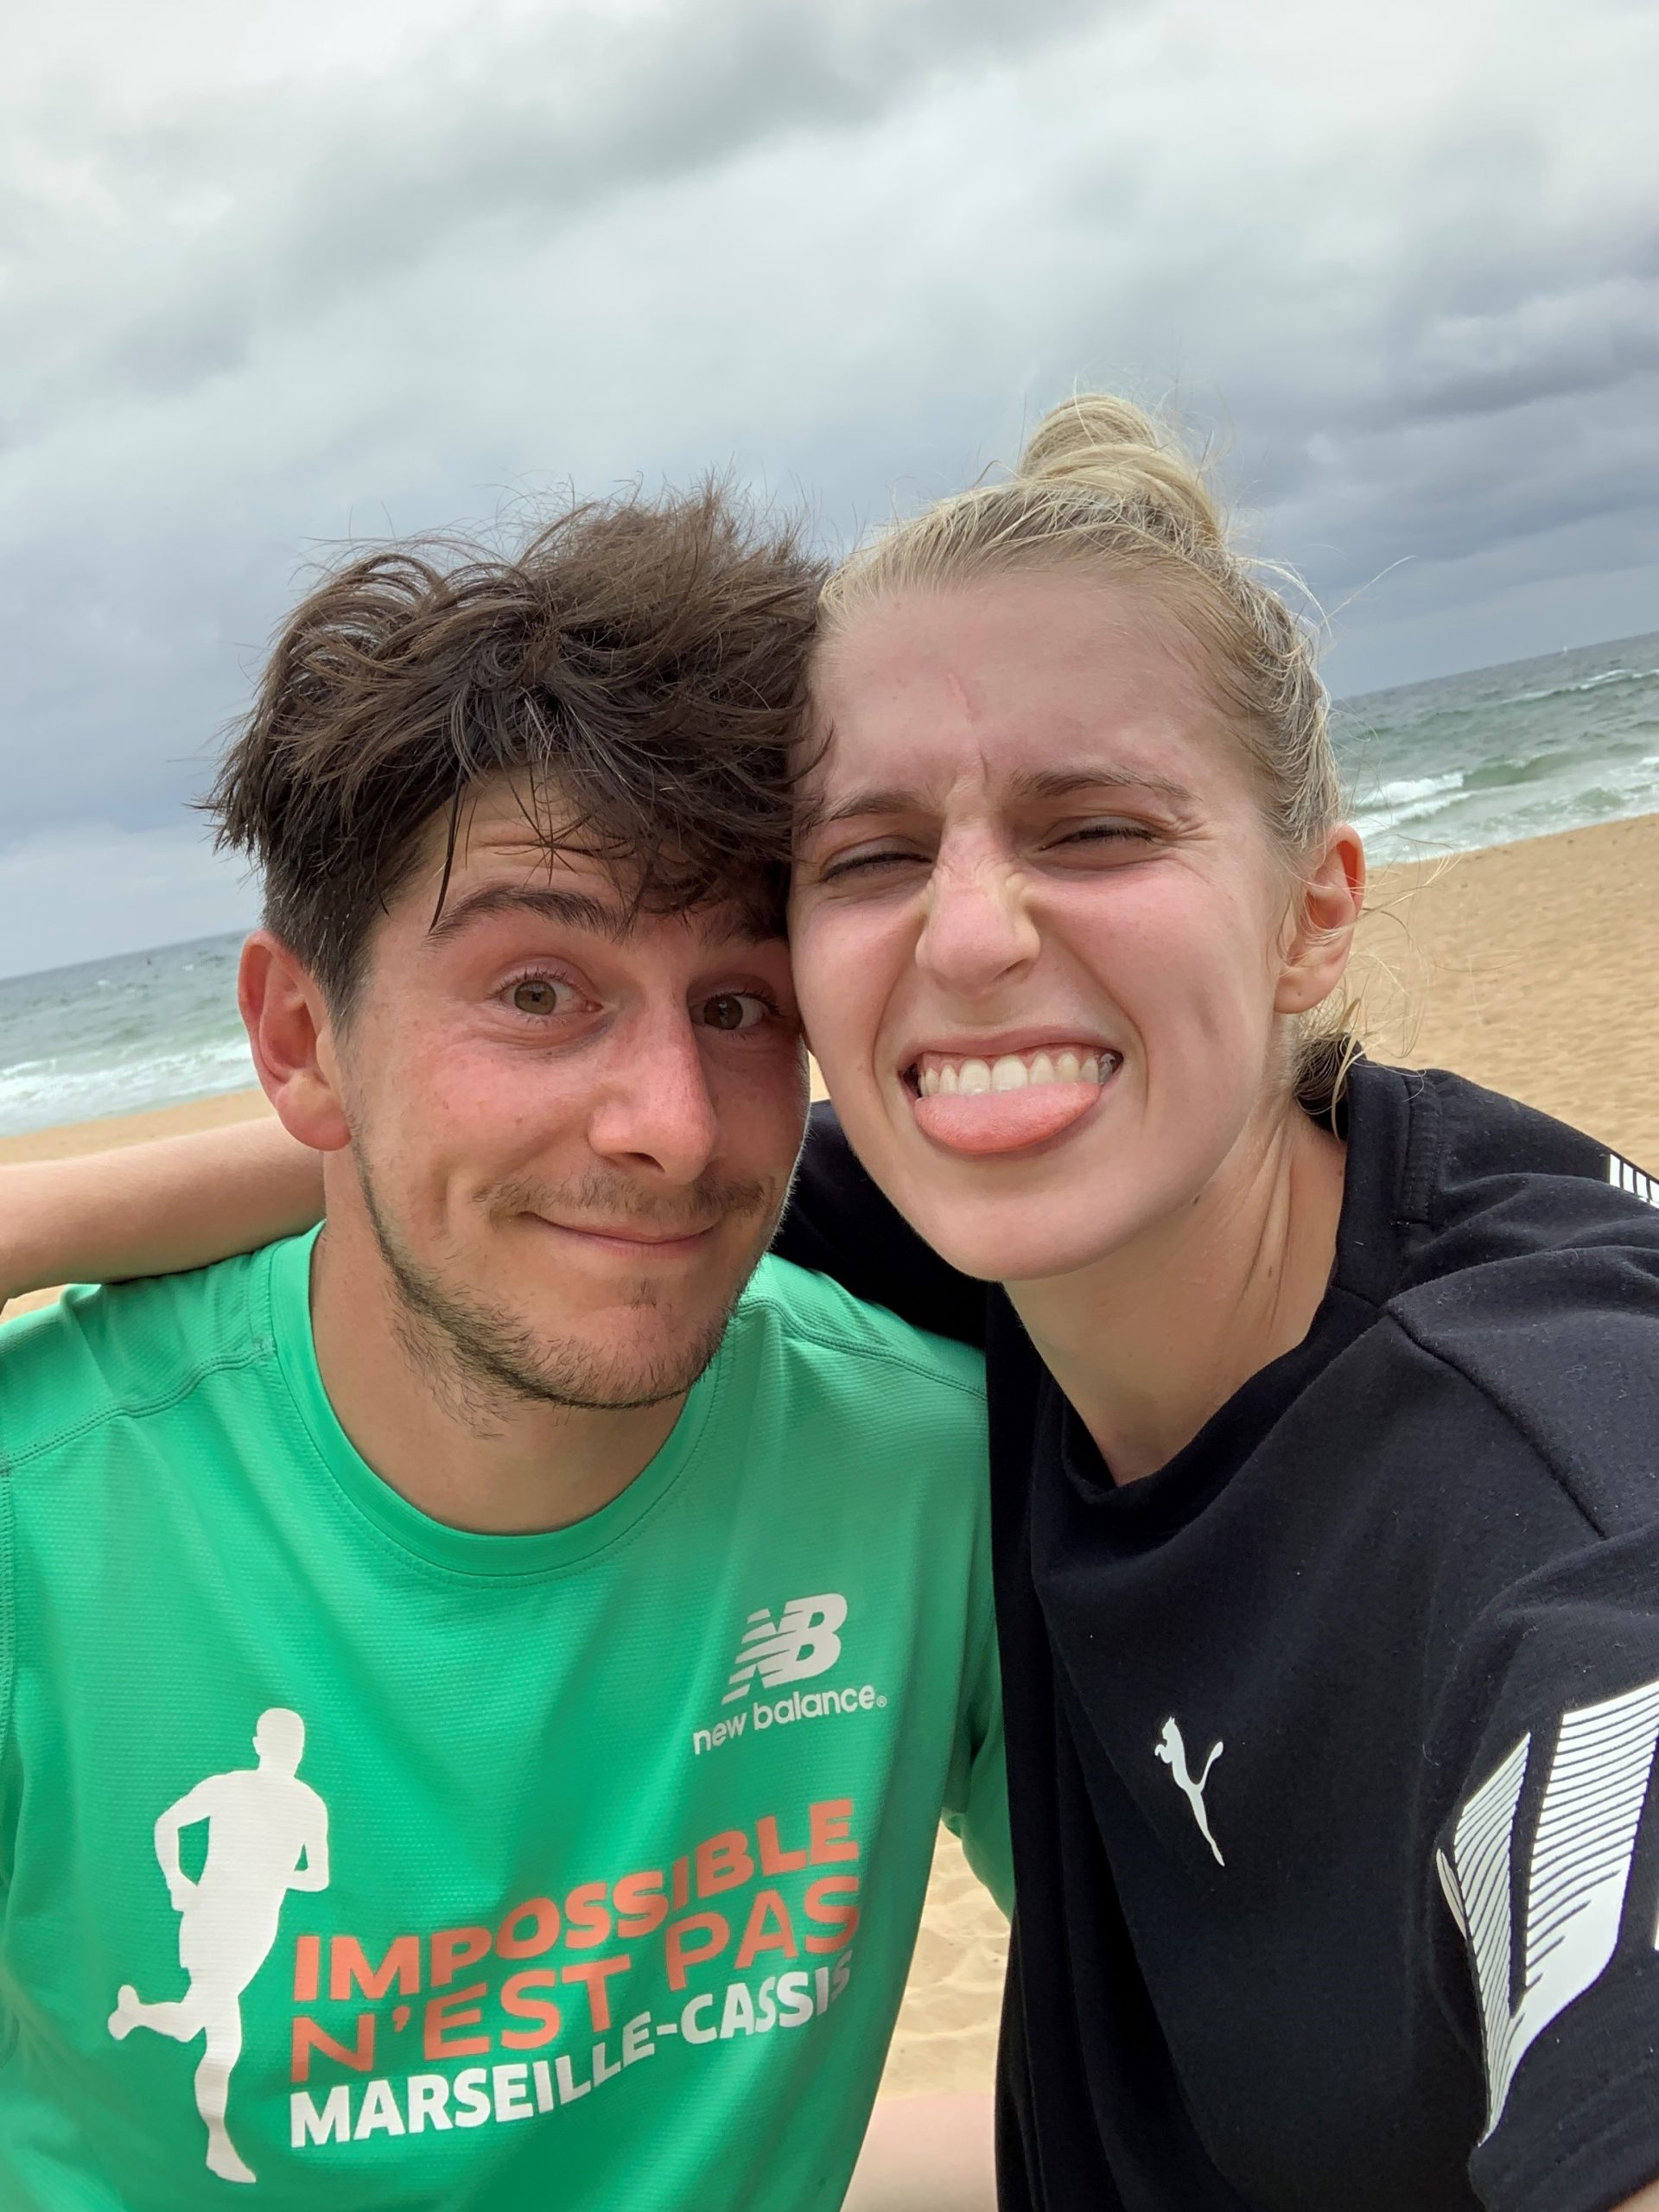 Abi and Alex taking a selfie together on a windswept beach